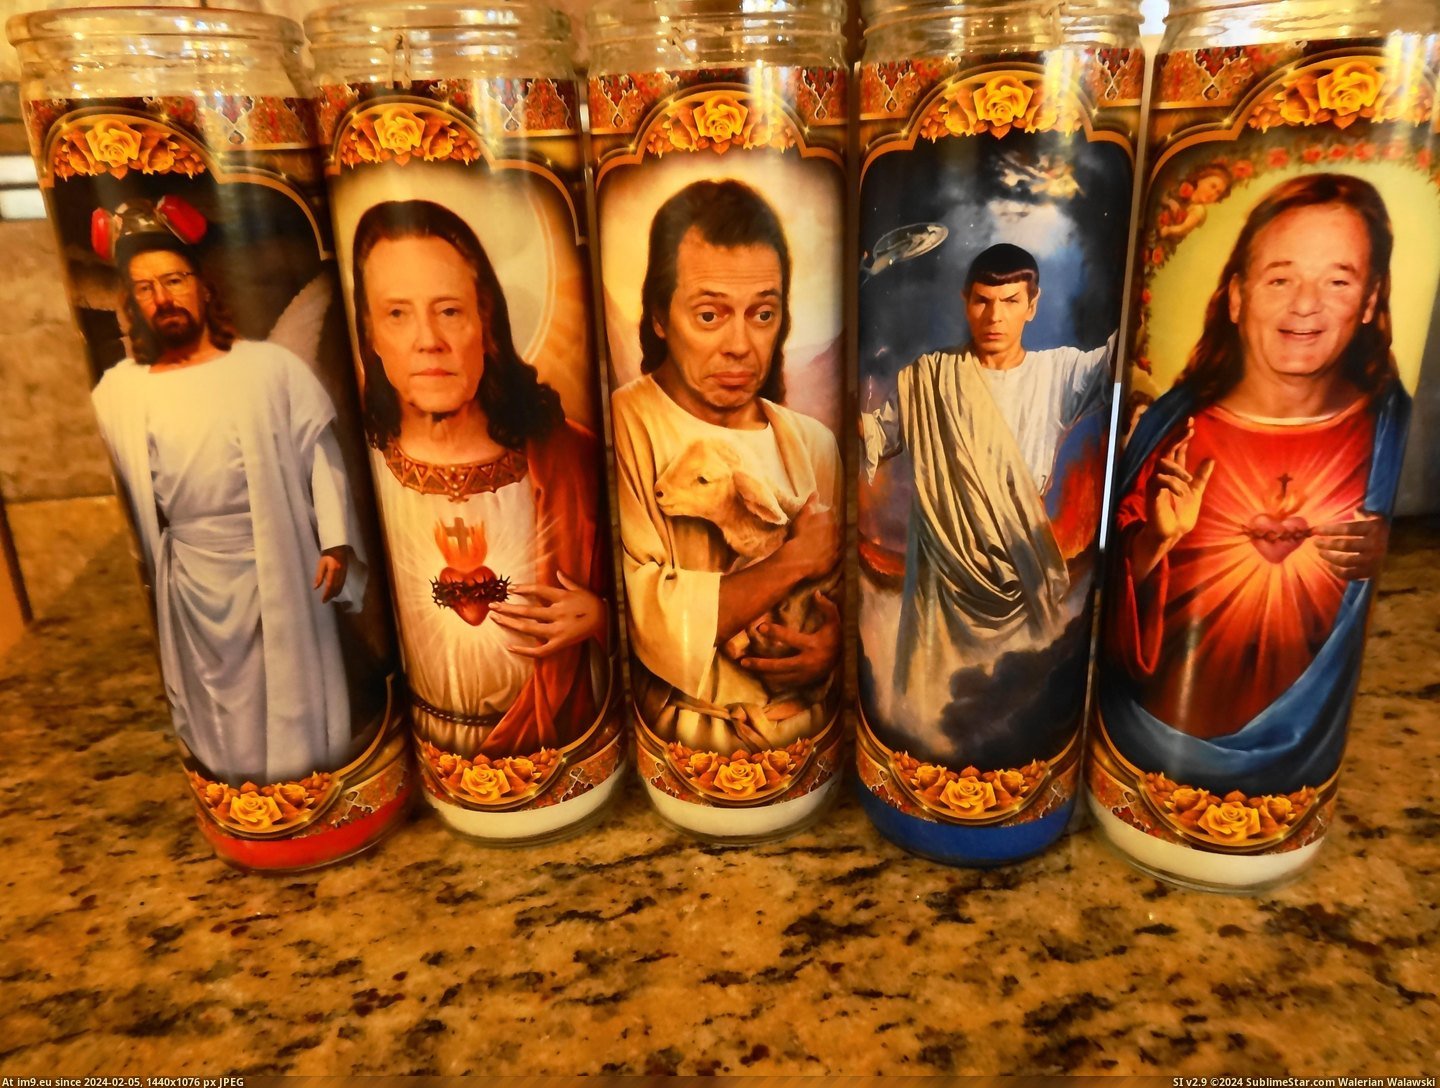 #Funny #Year #Dad #Outdid #Religous #Holidays #Odd #Candles [Funny] Every year my dad gets us odd religous candles around the holidays. This year he really outdid himself. Pic. (Bild von album My r/FUNNY favs))